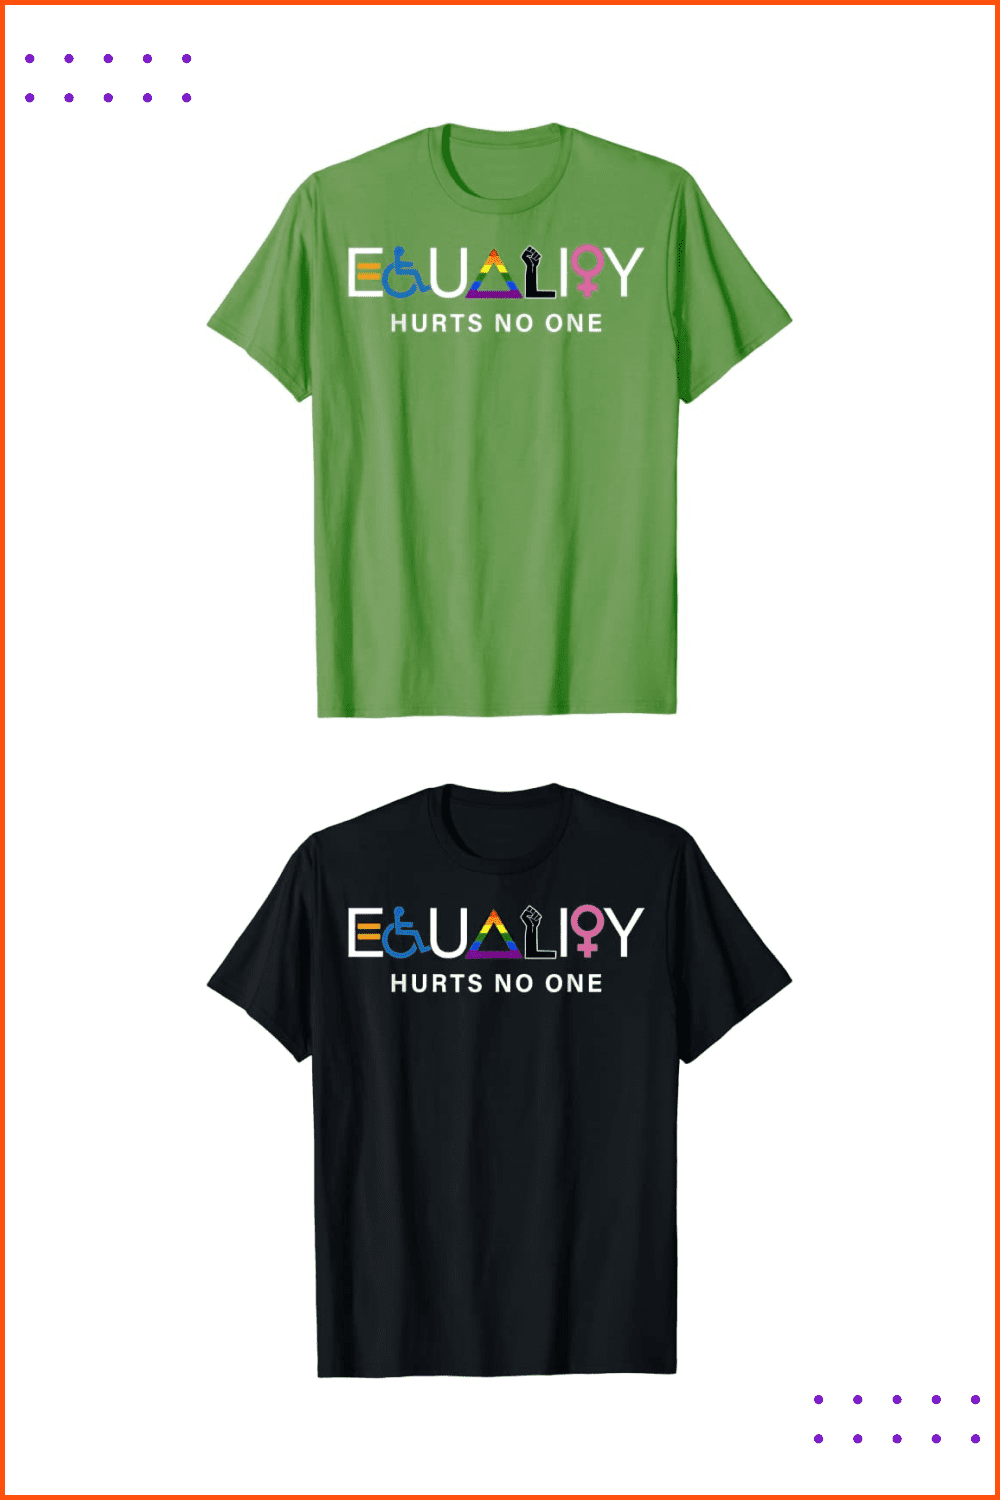 Black and green t-shirt with stylized slogan.